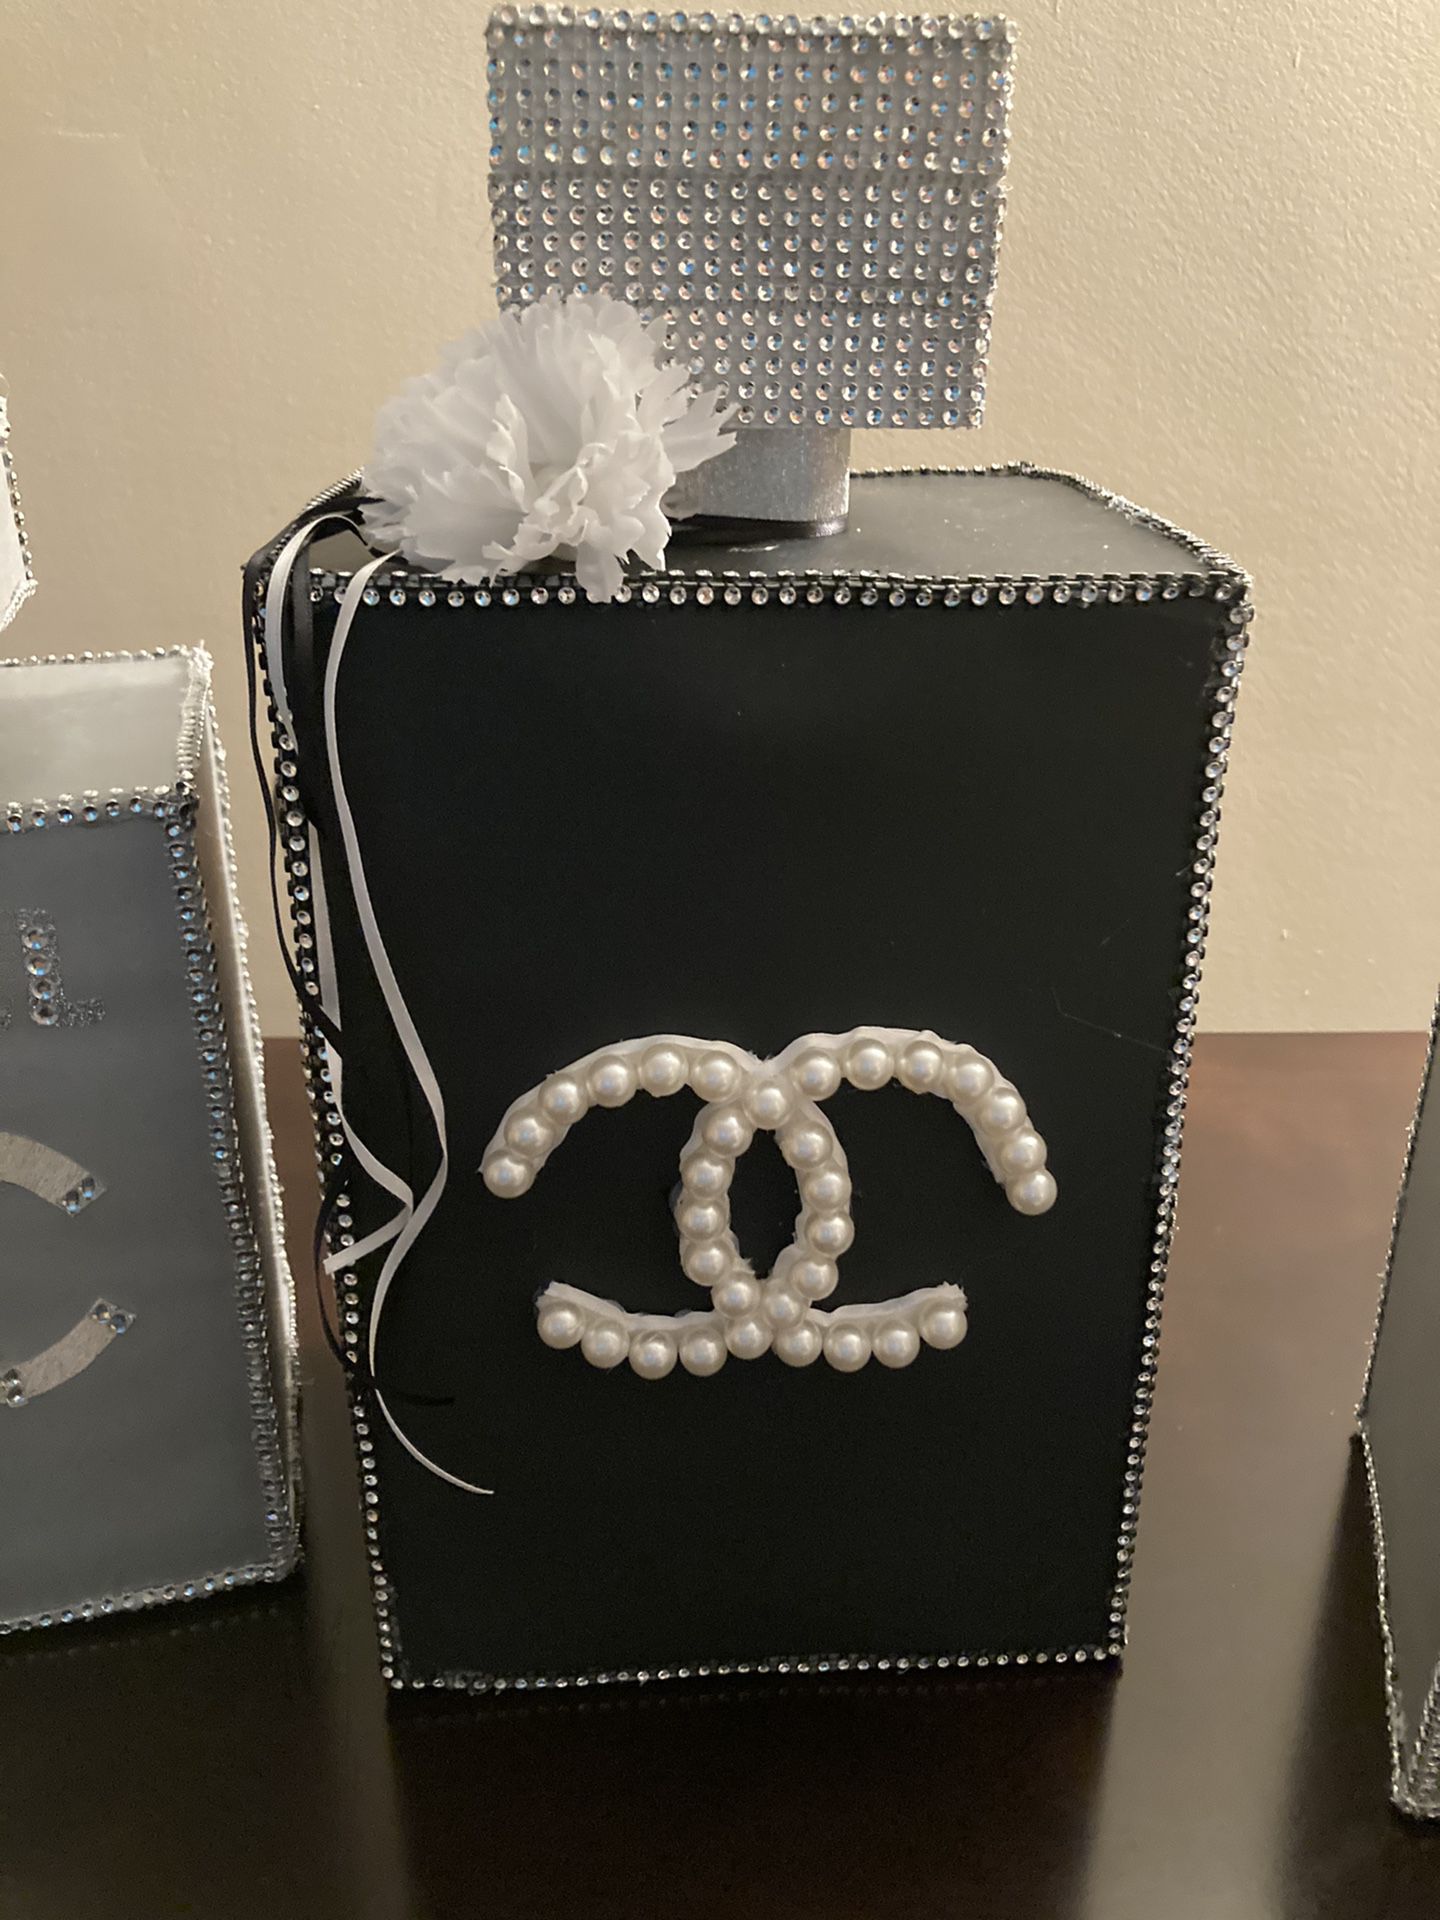 I’m selling my Chanel perfume boxes